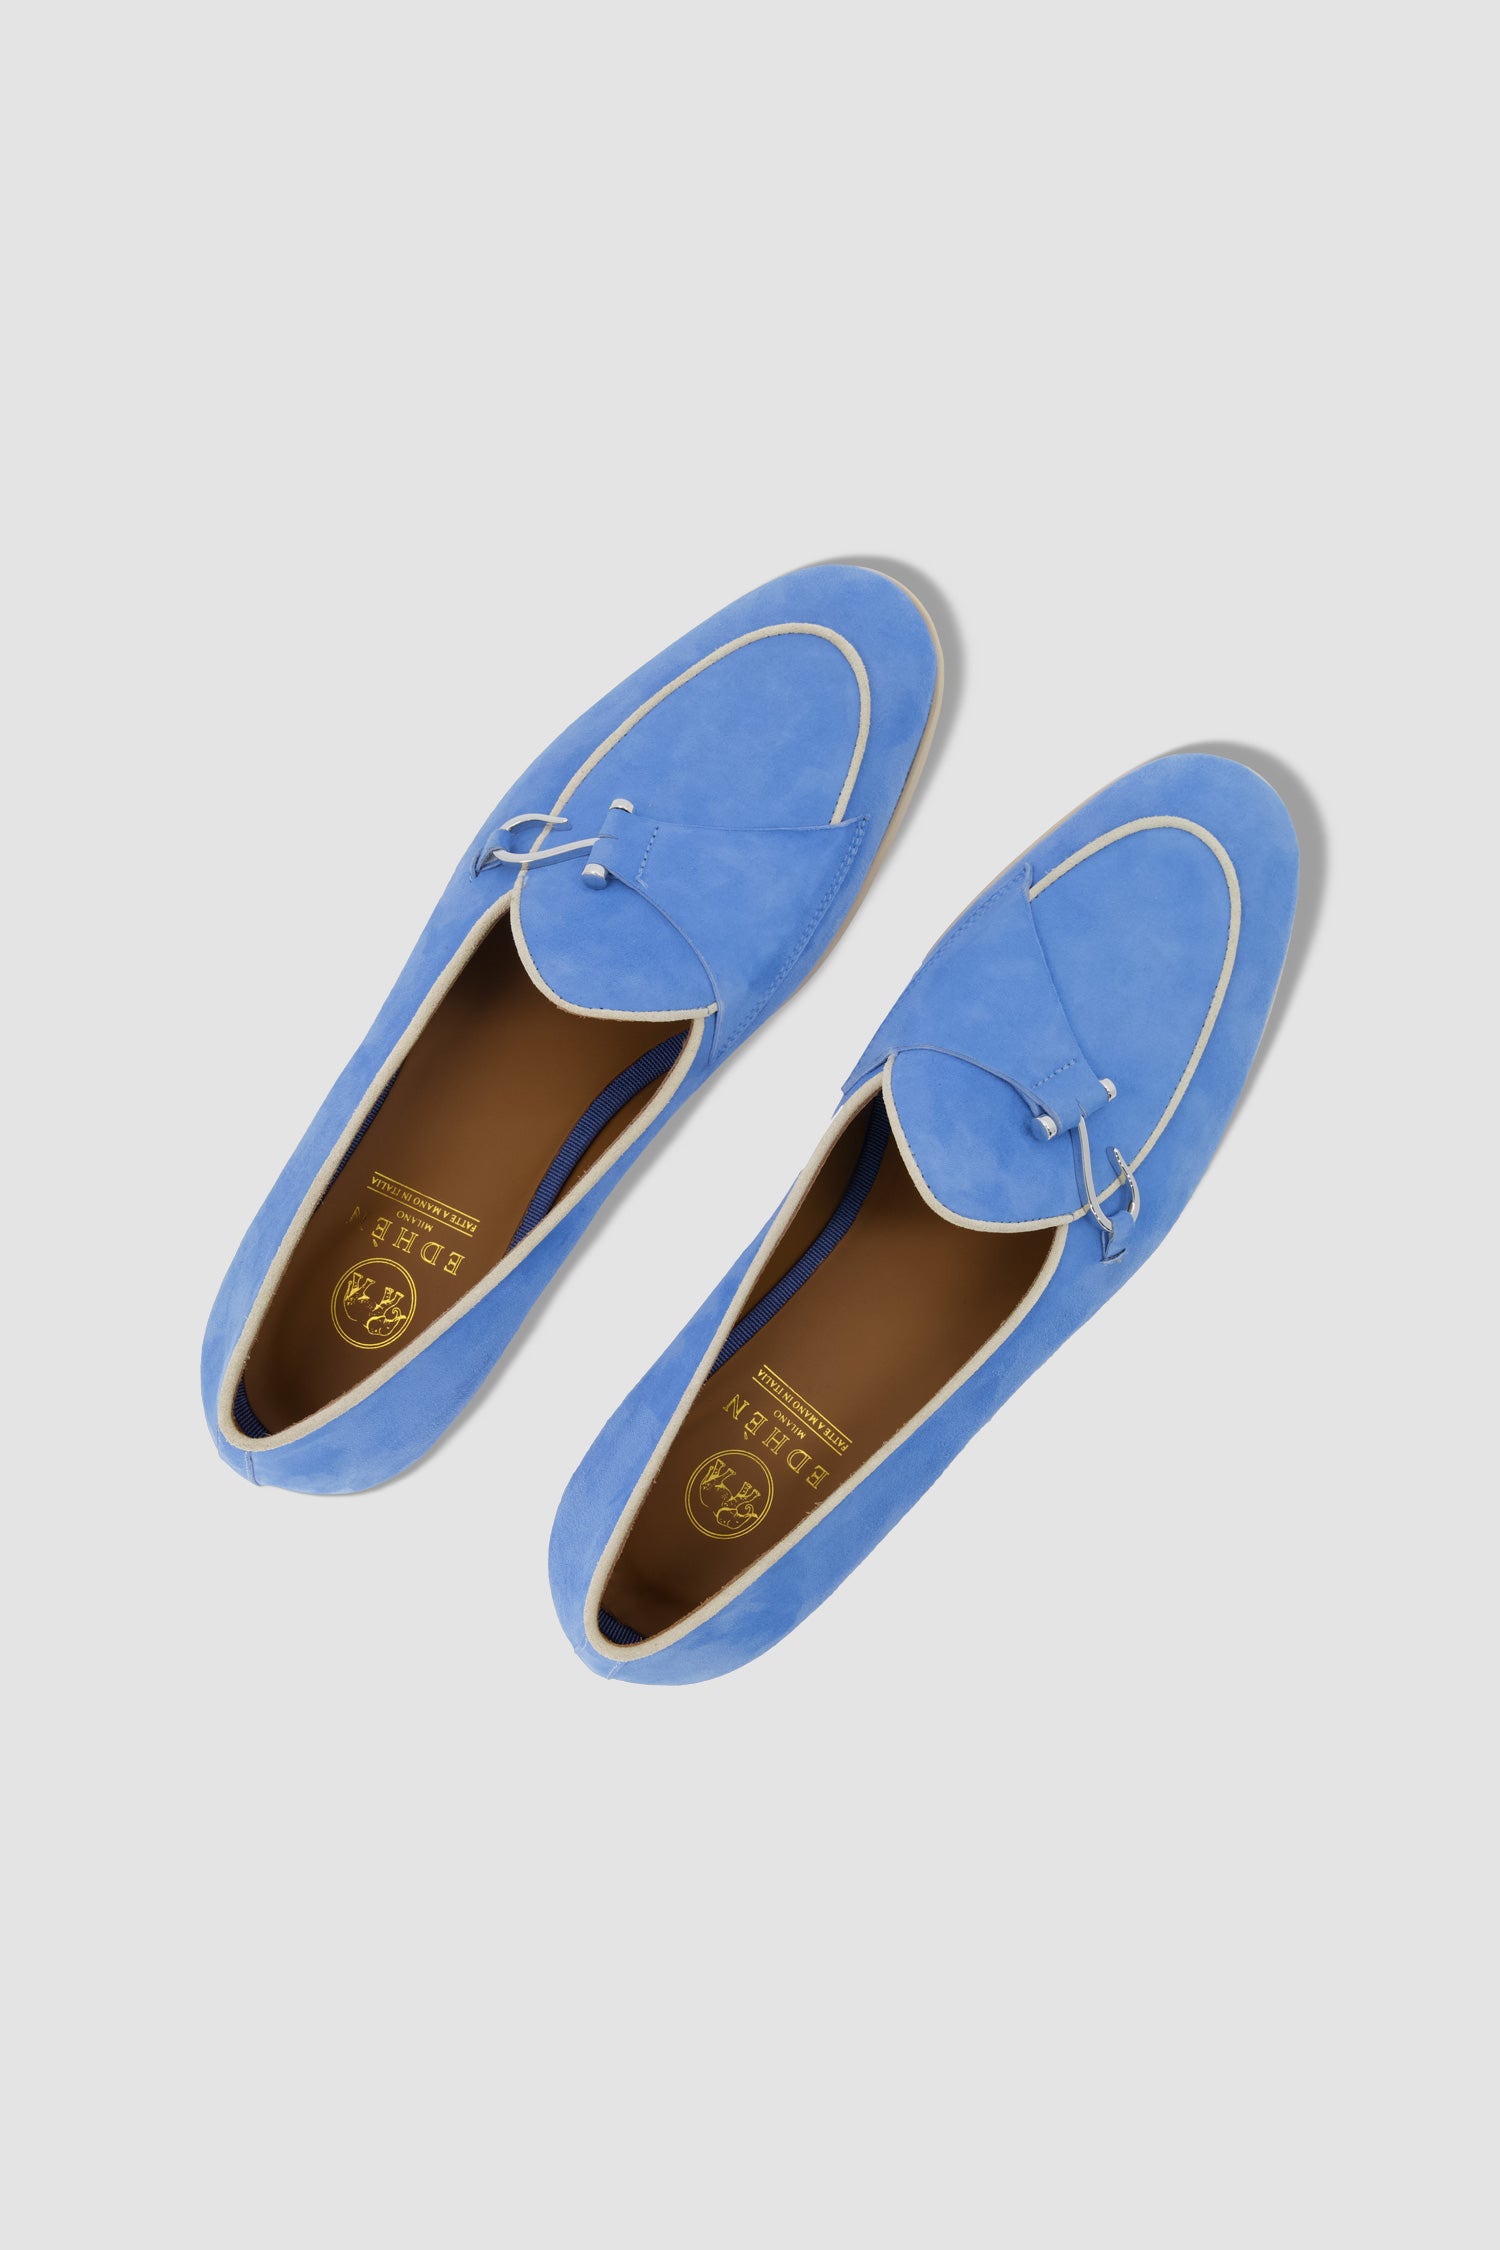 Edhen Milano Comporta Go Blue Suede Loafers